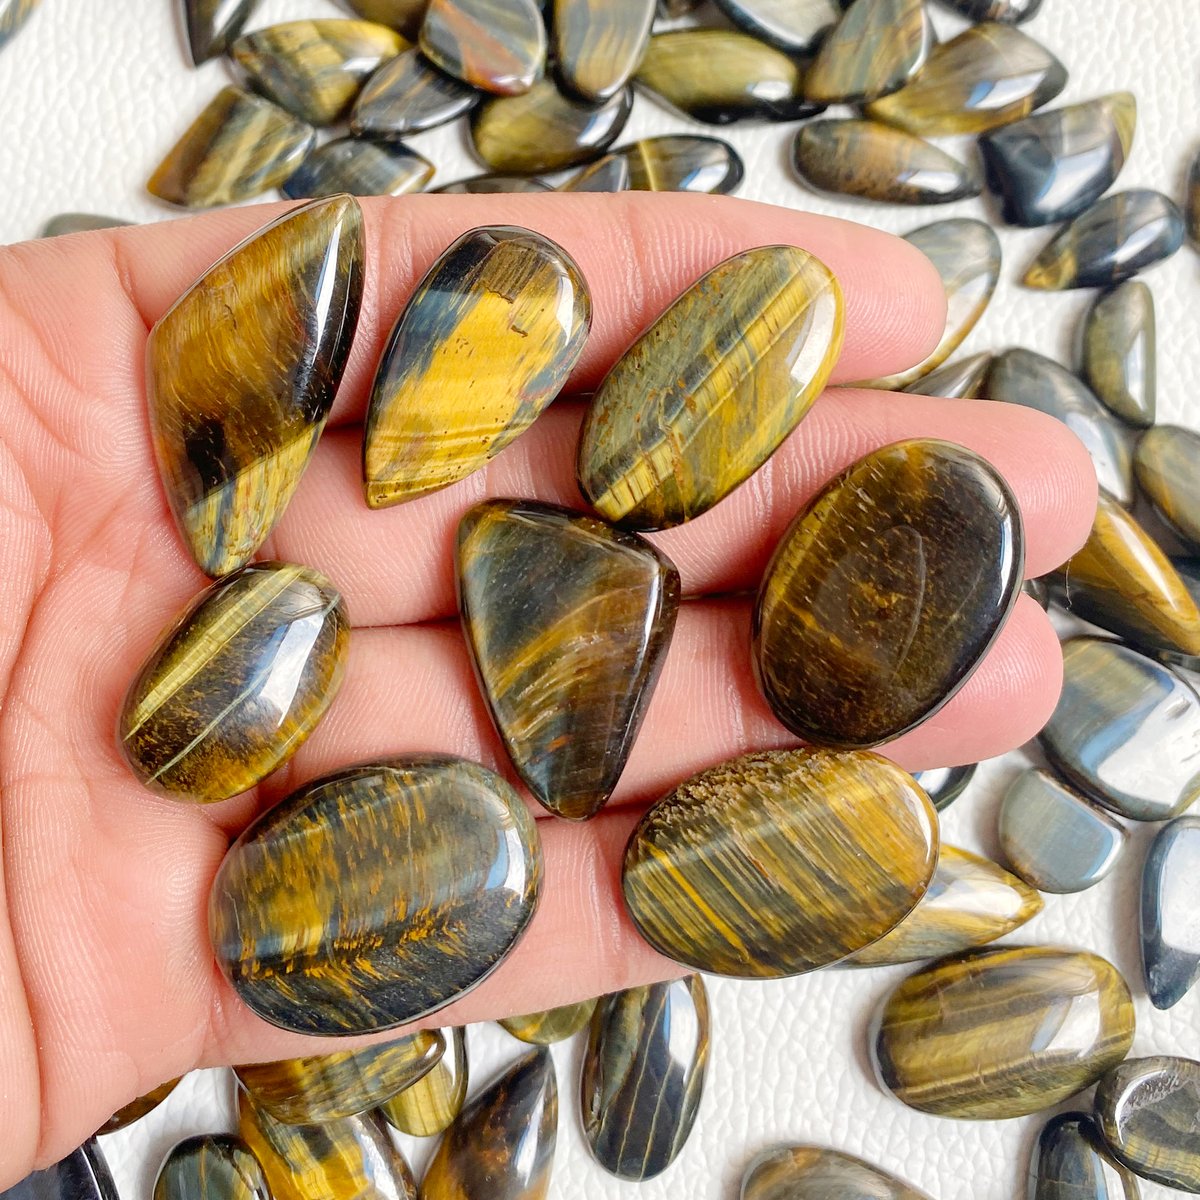 Tiger's Eye Healing Stone 

We accept payment through PayPal/Bank Transfer
• 100% secure checkout with PayPal/Bank 

#gemstone #cabochon #jewelrystone #naturalstone #loosegemstone #crystalgemstone #healinggemstone #tigereye #tigereyejewelry #tigereyependant #tigereyestone